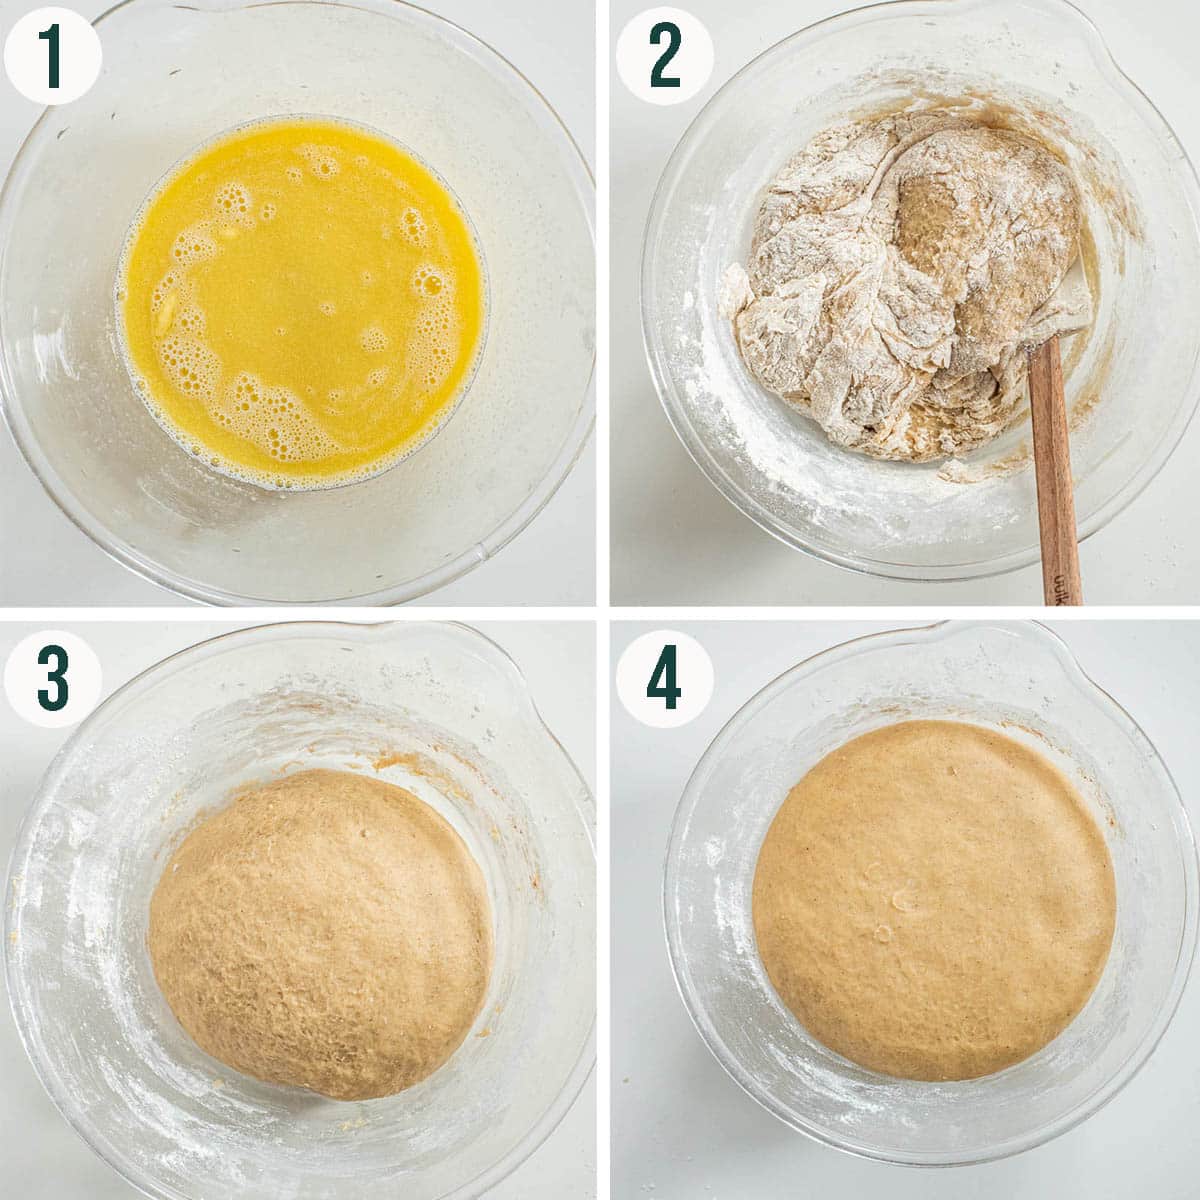 Sweet yeast dough steps 1 to 4, mixing the dough and before and after rising.